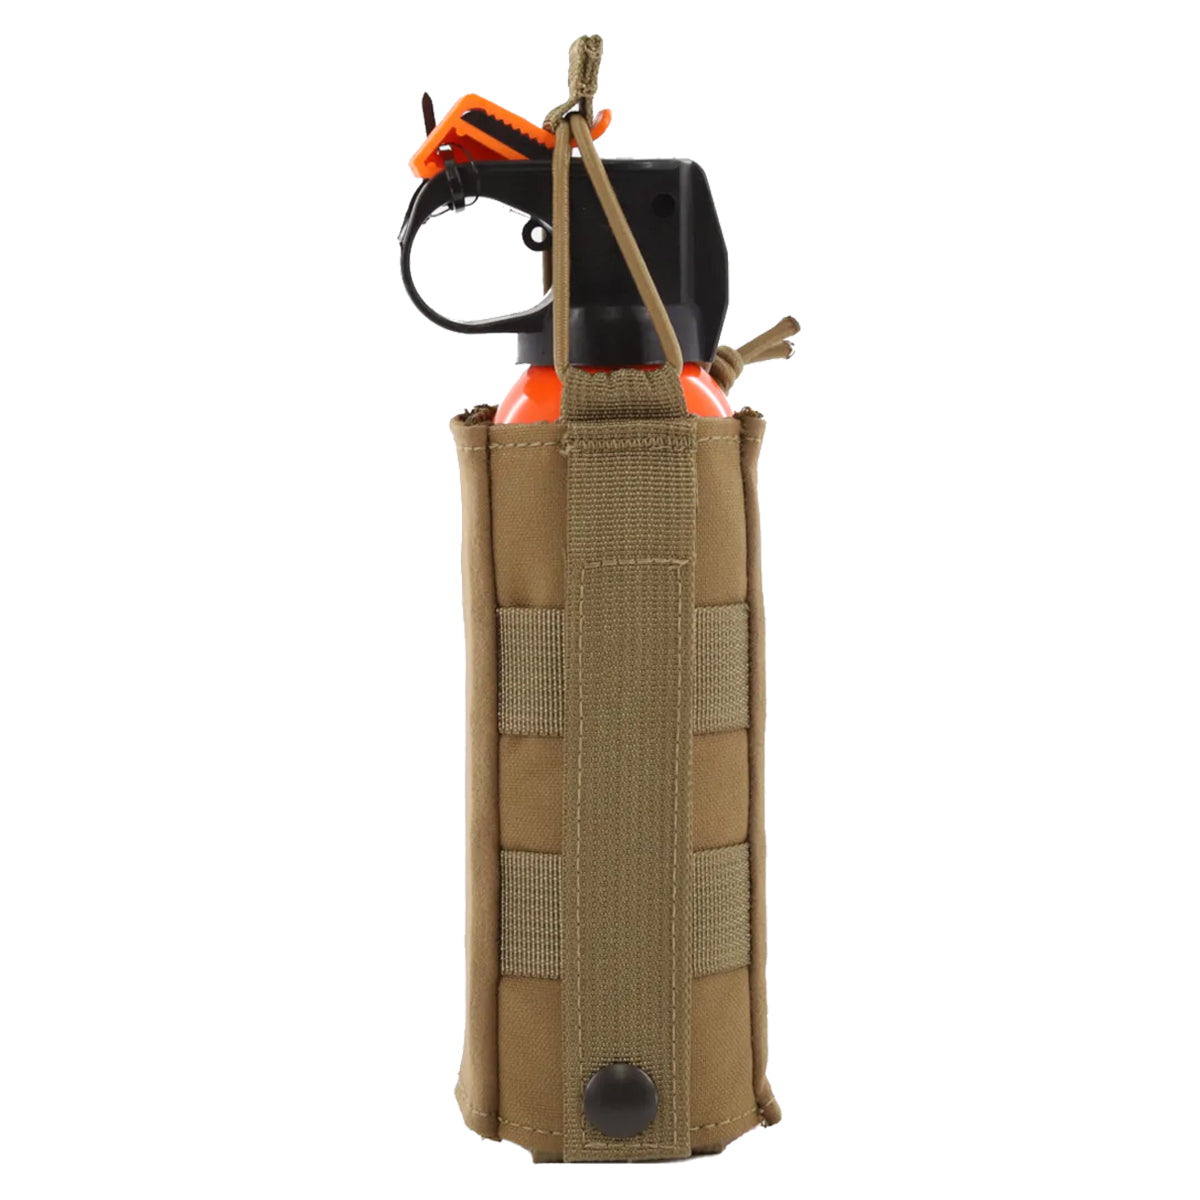 Marsupial Gear Bear Spray Pouch in Coyote by GOHUNT | Marsupial Gear - GOHUNT Shop